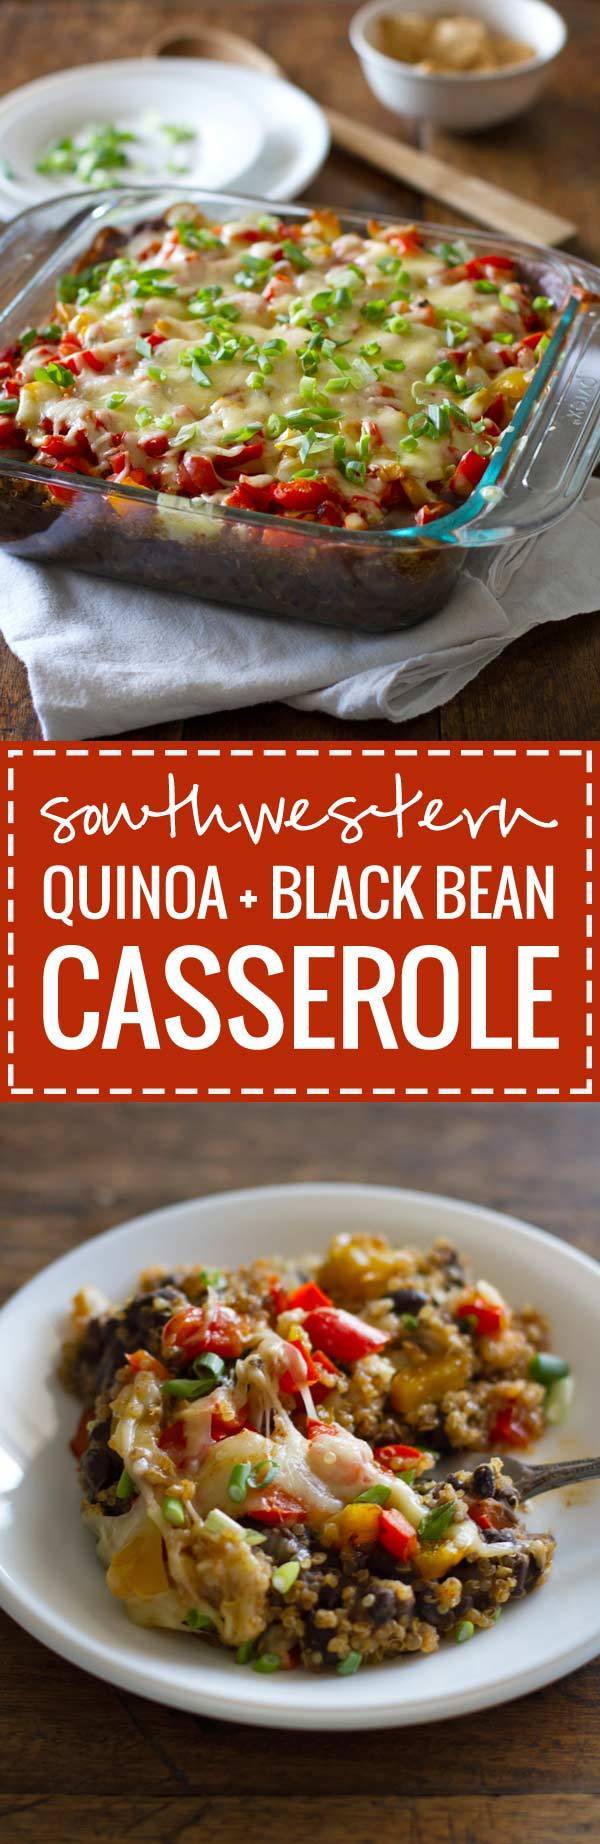 This Southwestern quinoa and black bean casserole is a delicious and healthy way to enjoy Mexican comfort food! Just 240 calories per serving.